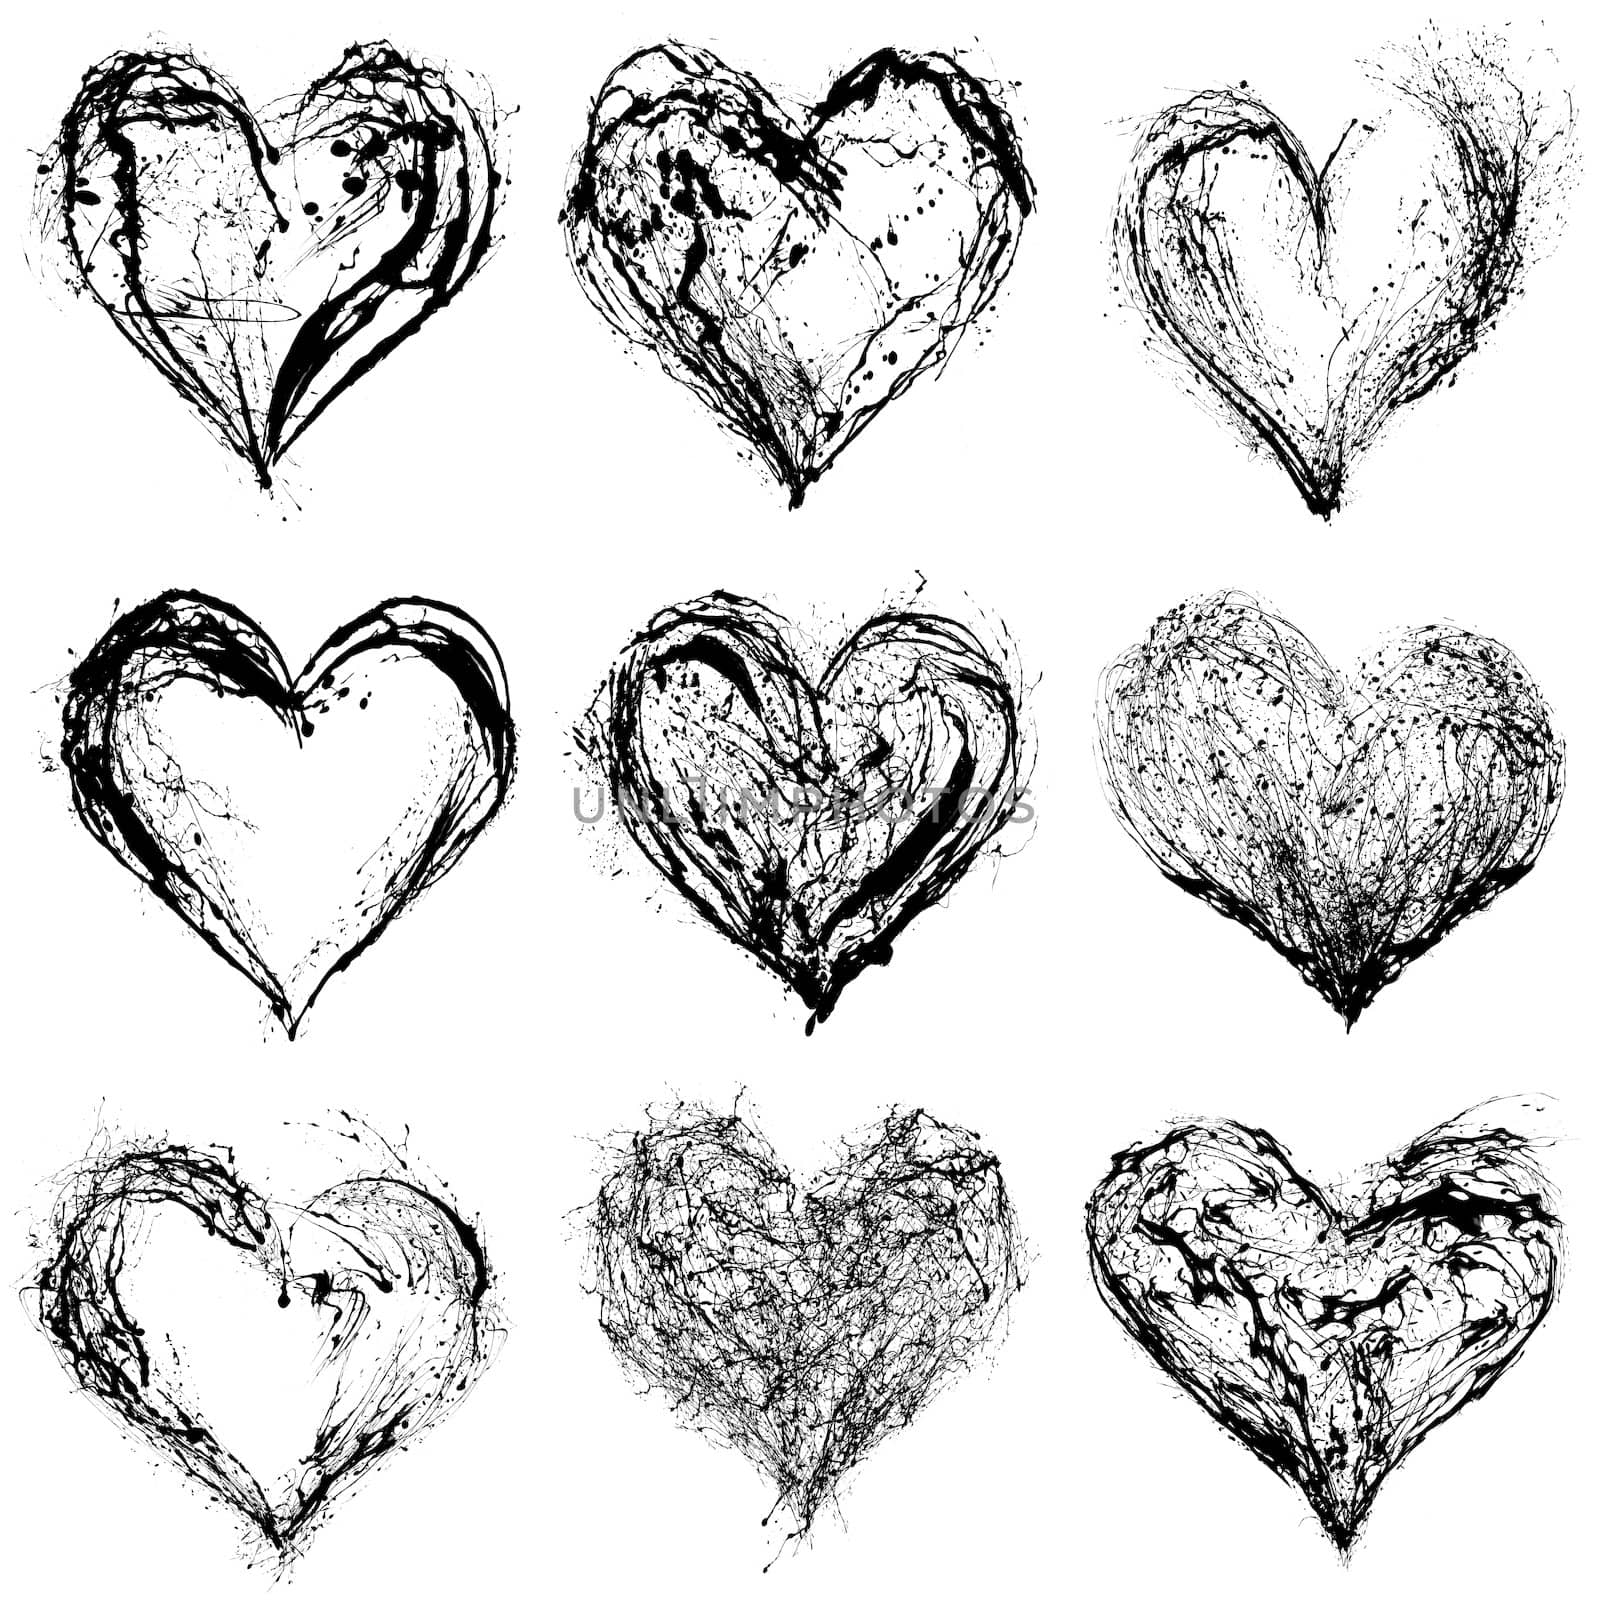 Abstract Valentine black hearts on white background